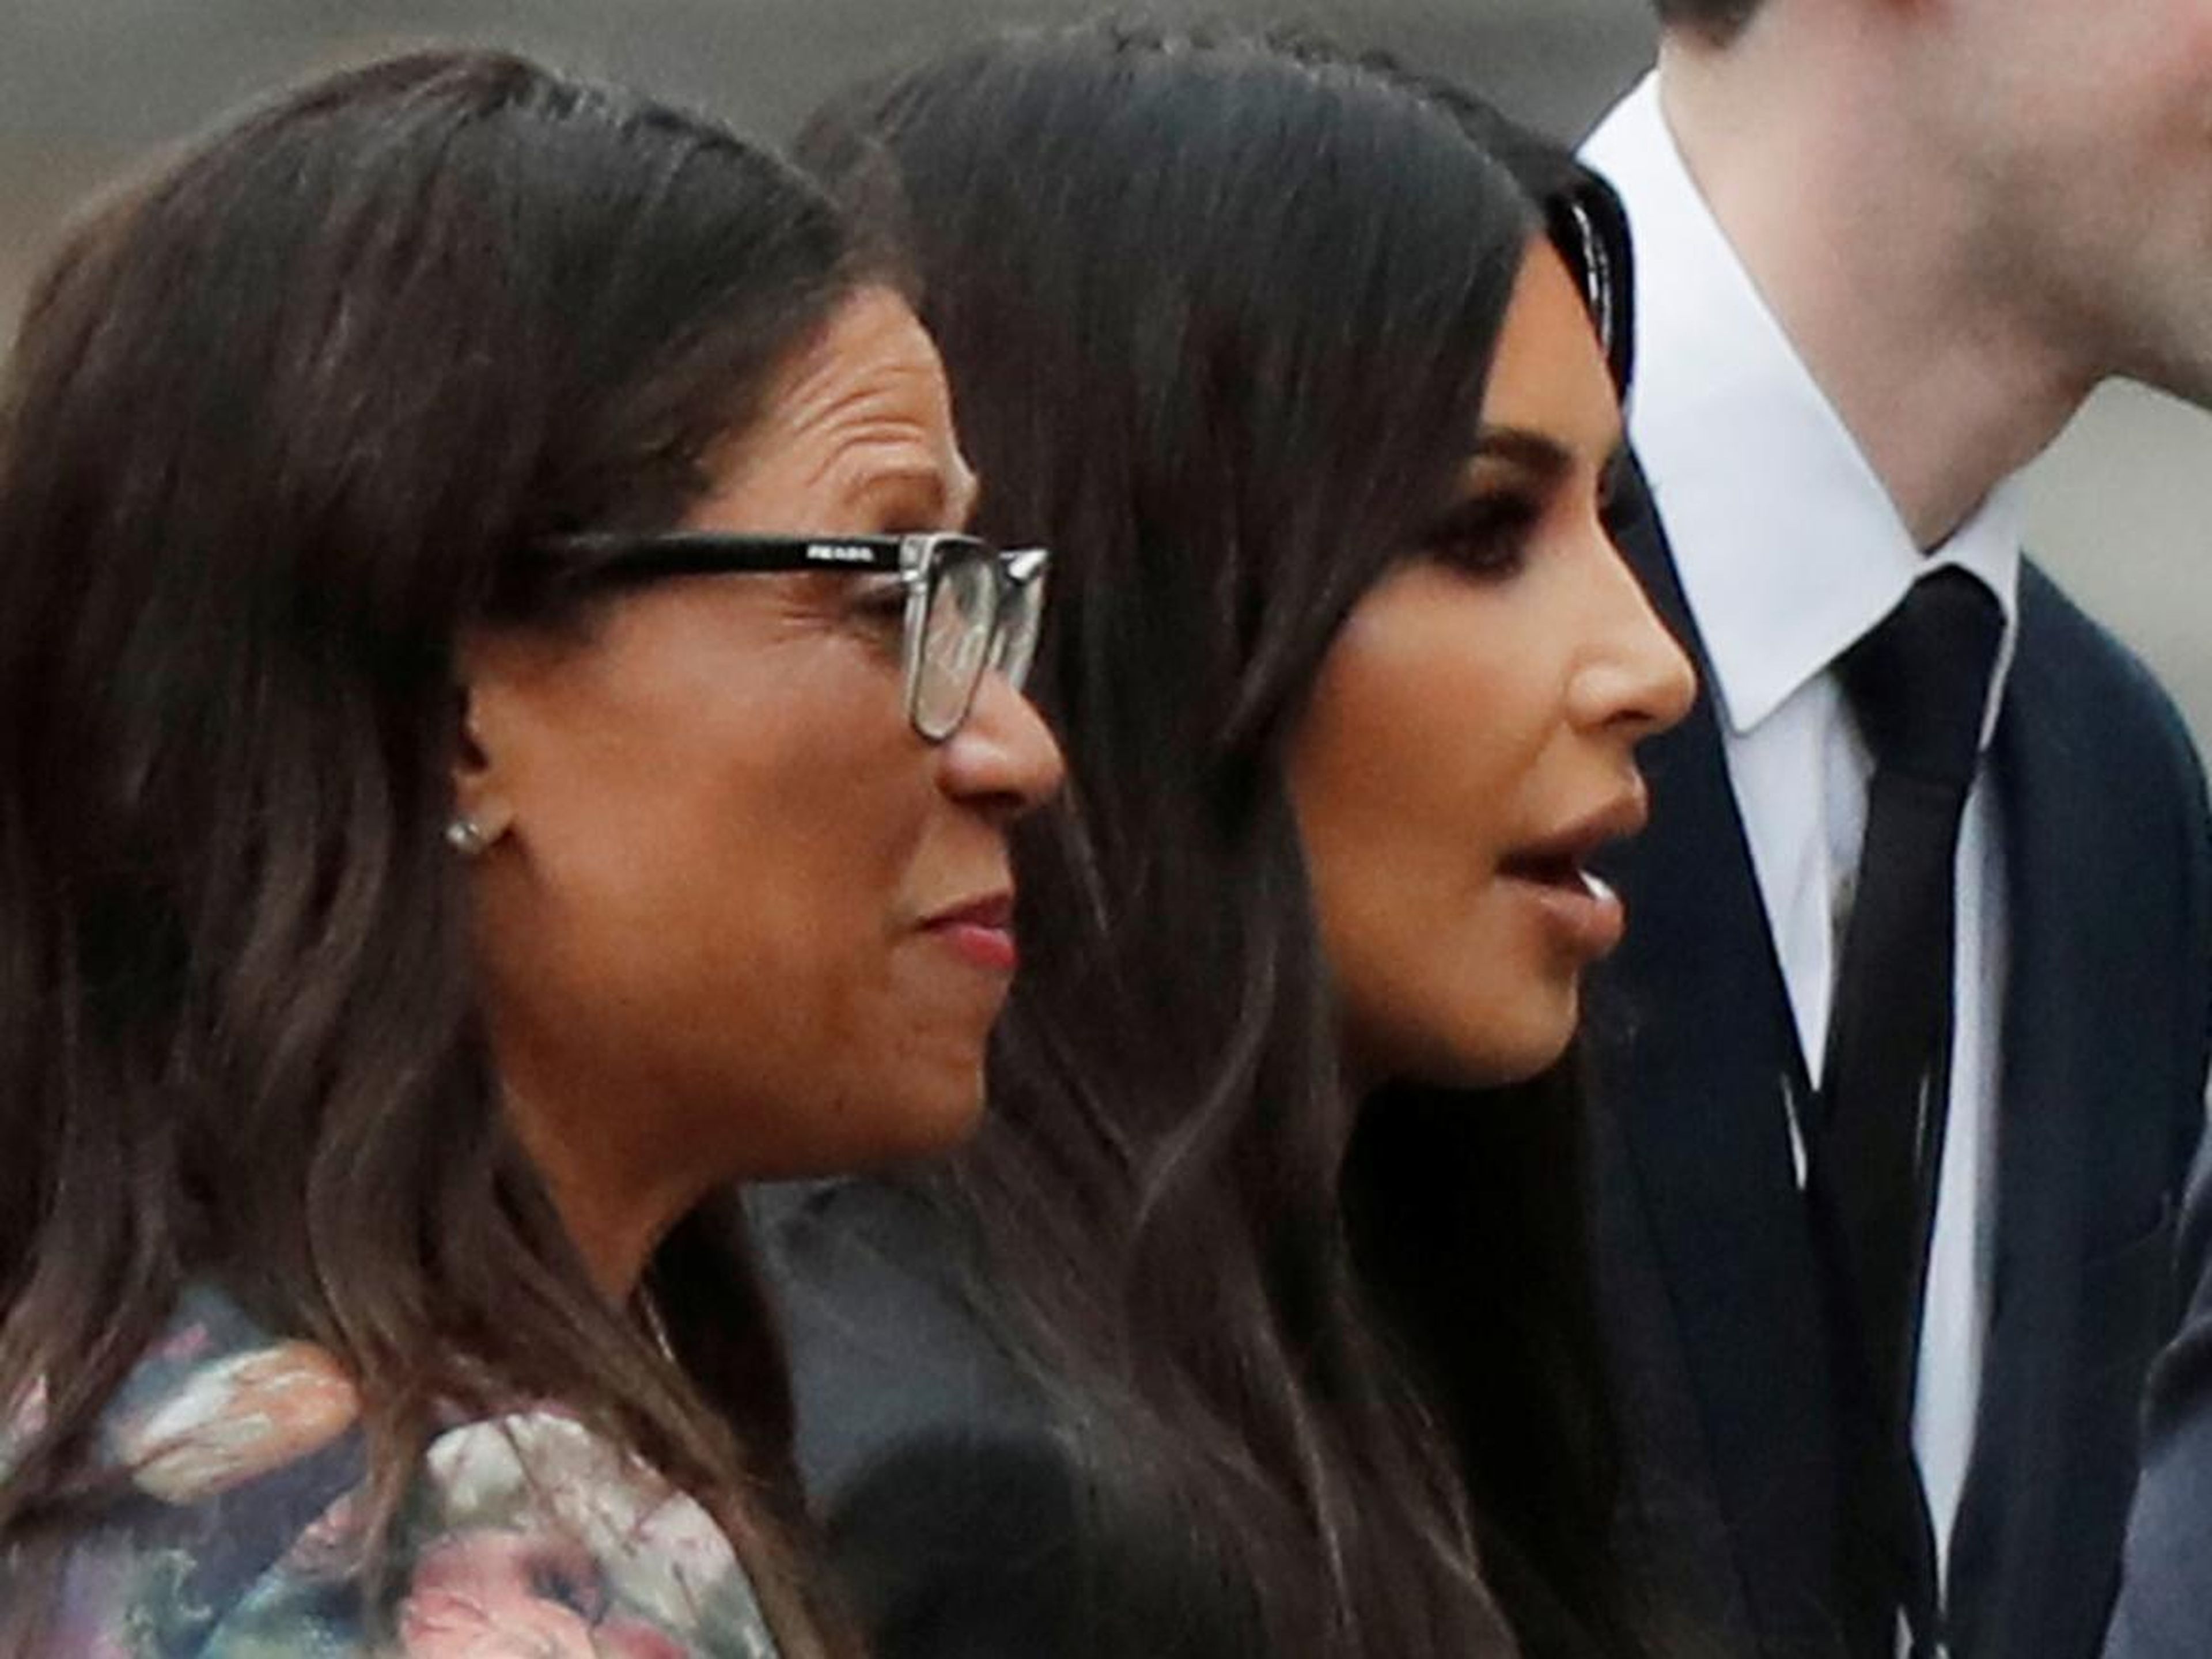 Kim Kardashian West leaves the West Wing after meetings at the White House in 2018.